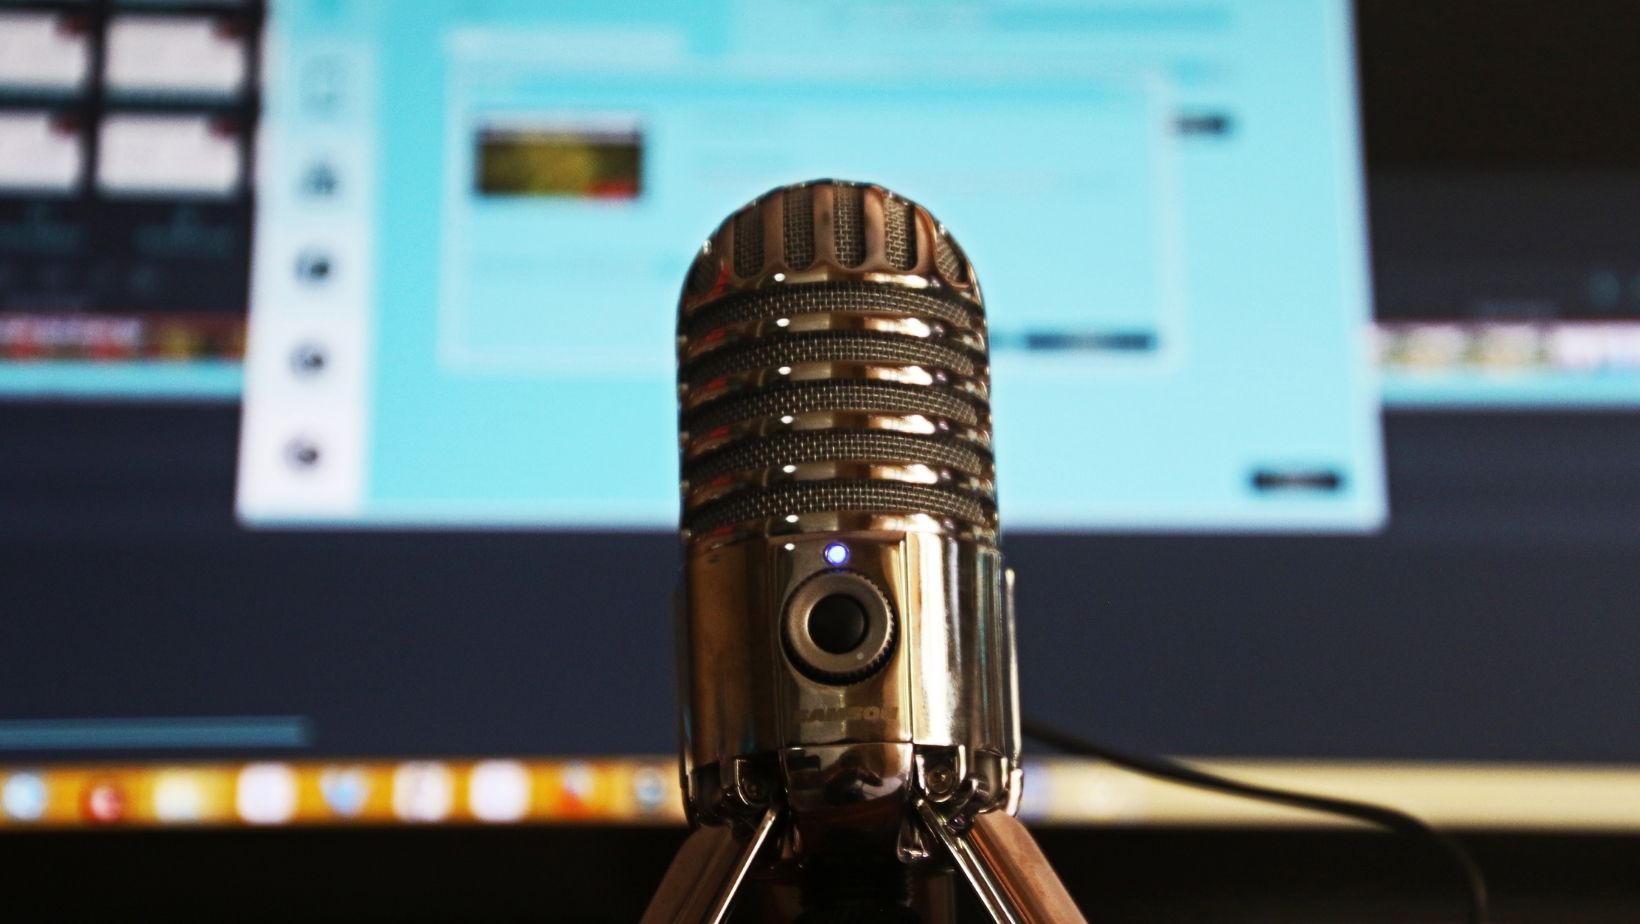 microphone in foreground with computer screen in background